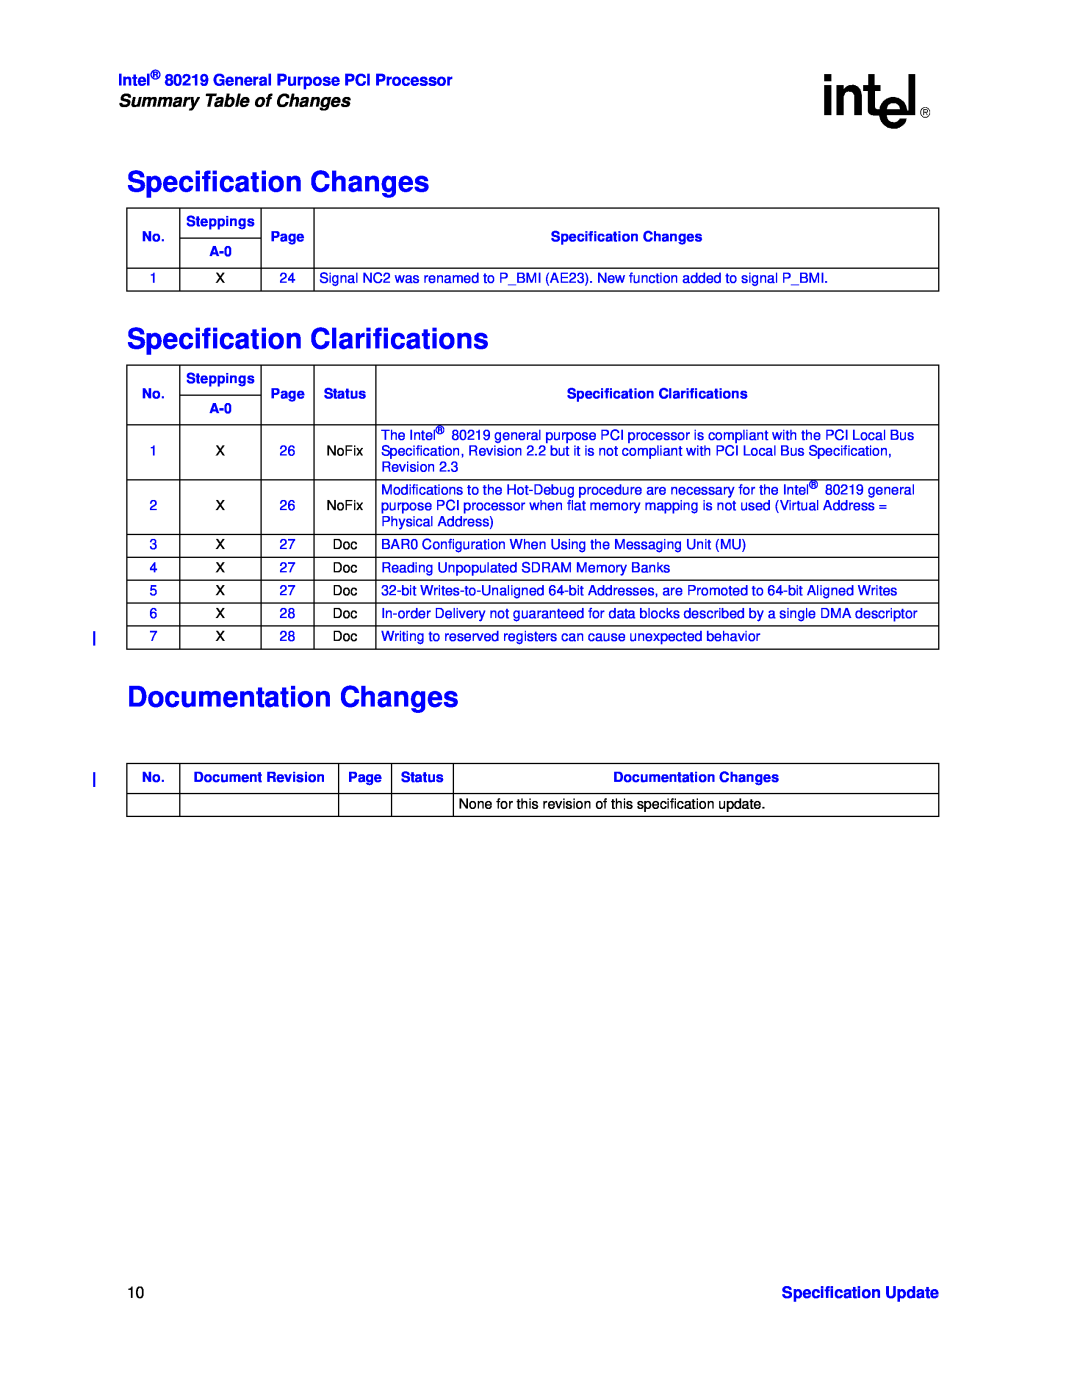 Intel 80219 Specification Changes, Specification Clarifications, Documentation Changes, Summary Table of Changes 